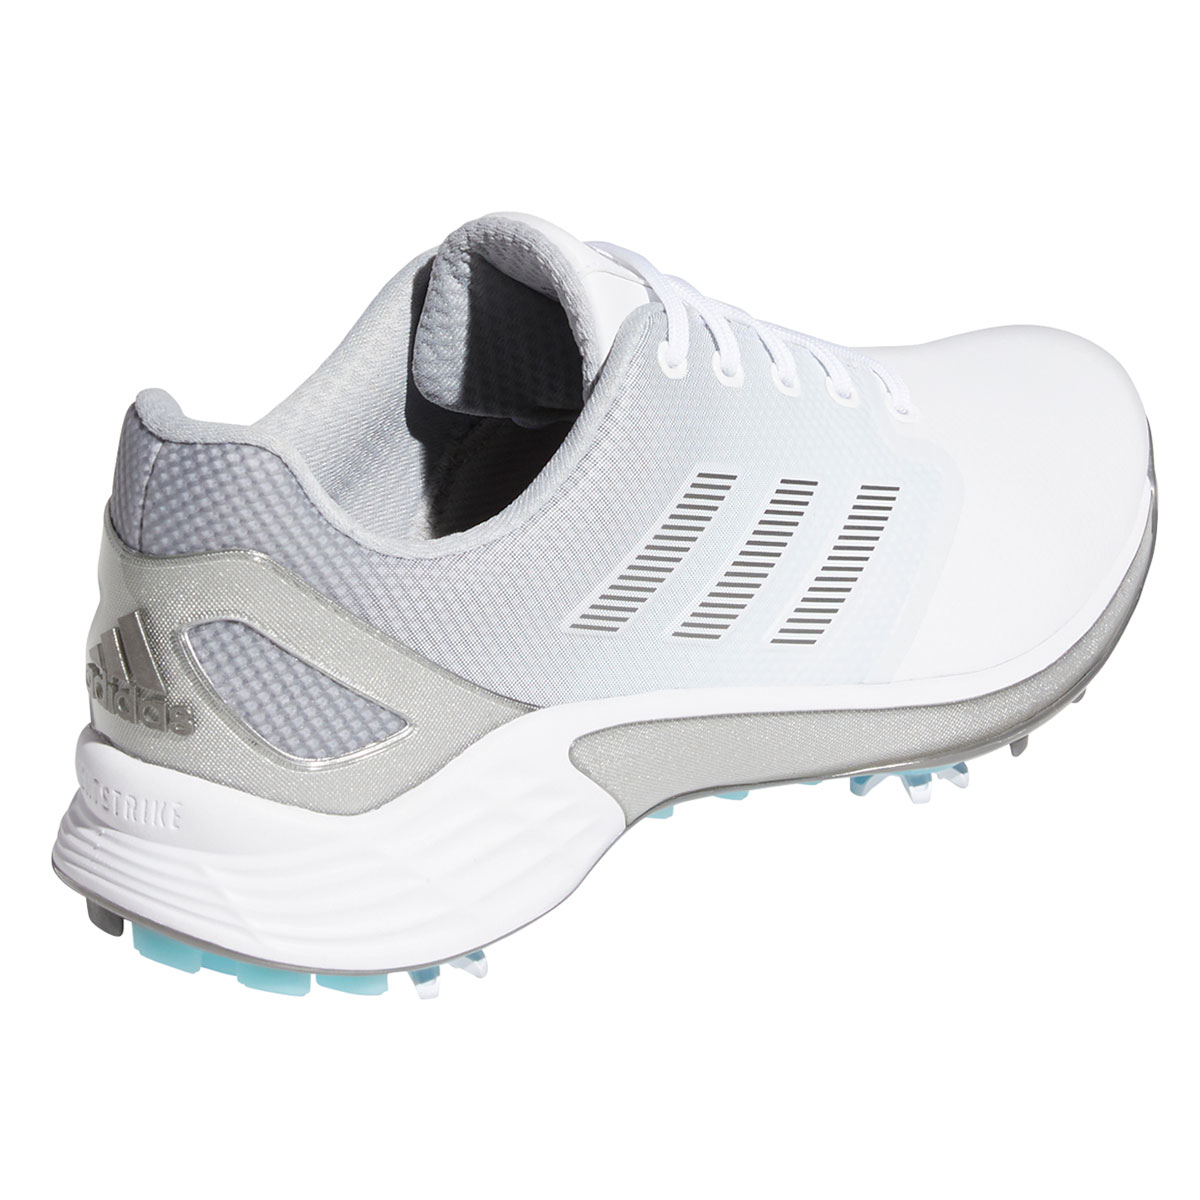 What is adidas zg21 golf shoes?